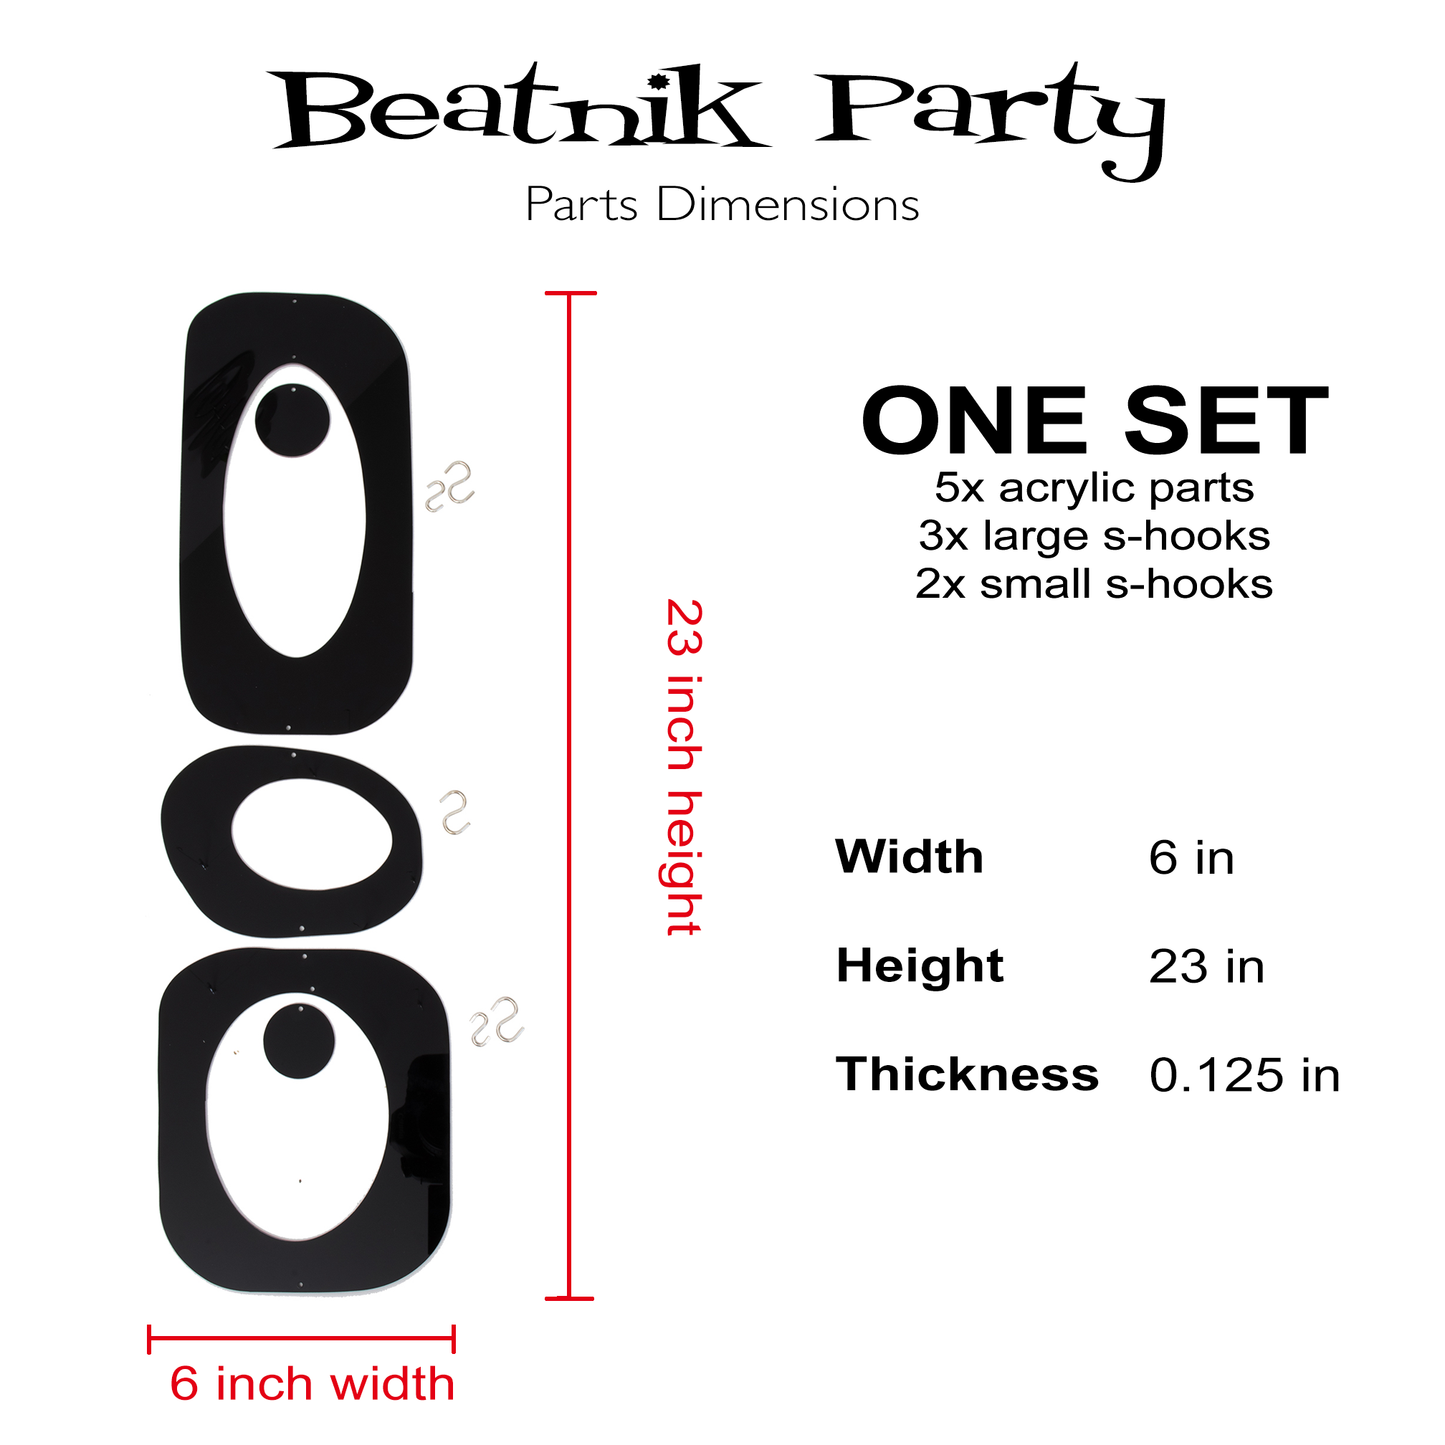 Beatnik Party Parts Dimensions for one set of DIY Kit to make room dividers, curtains, and art mobiles by AtomicMobiles.com